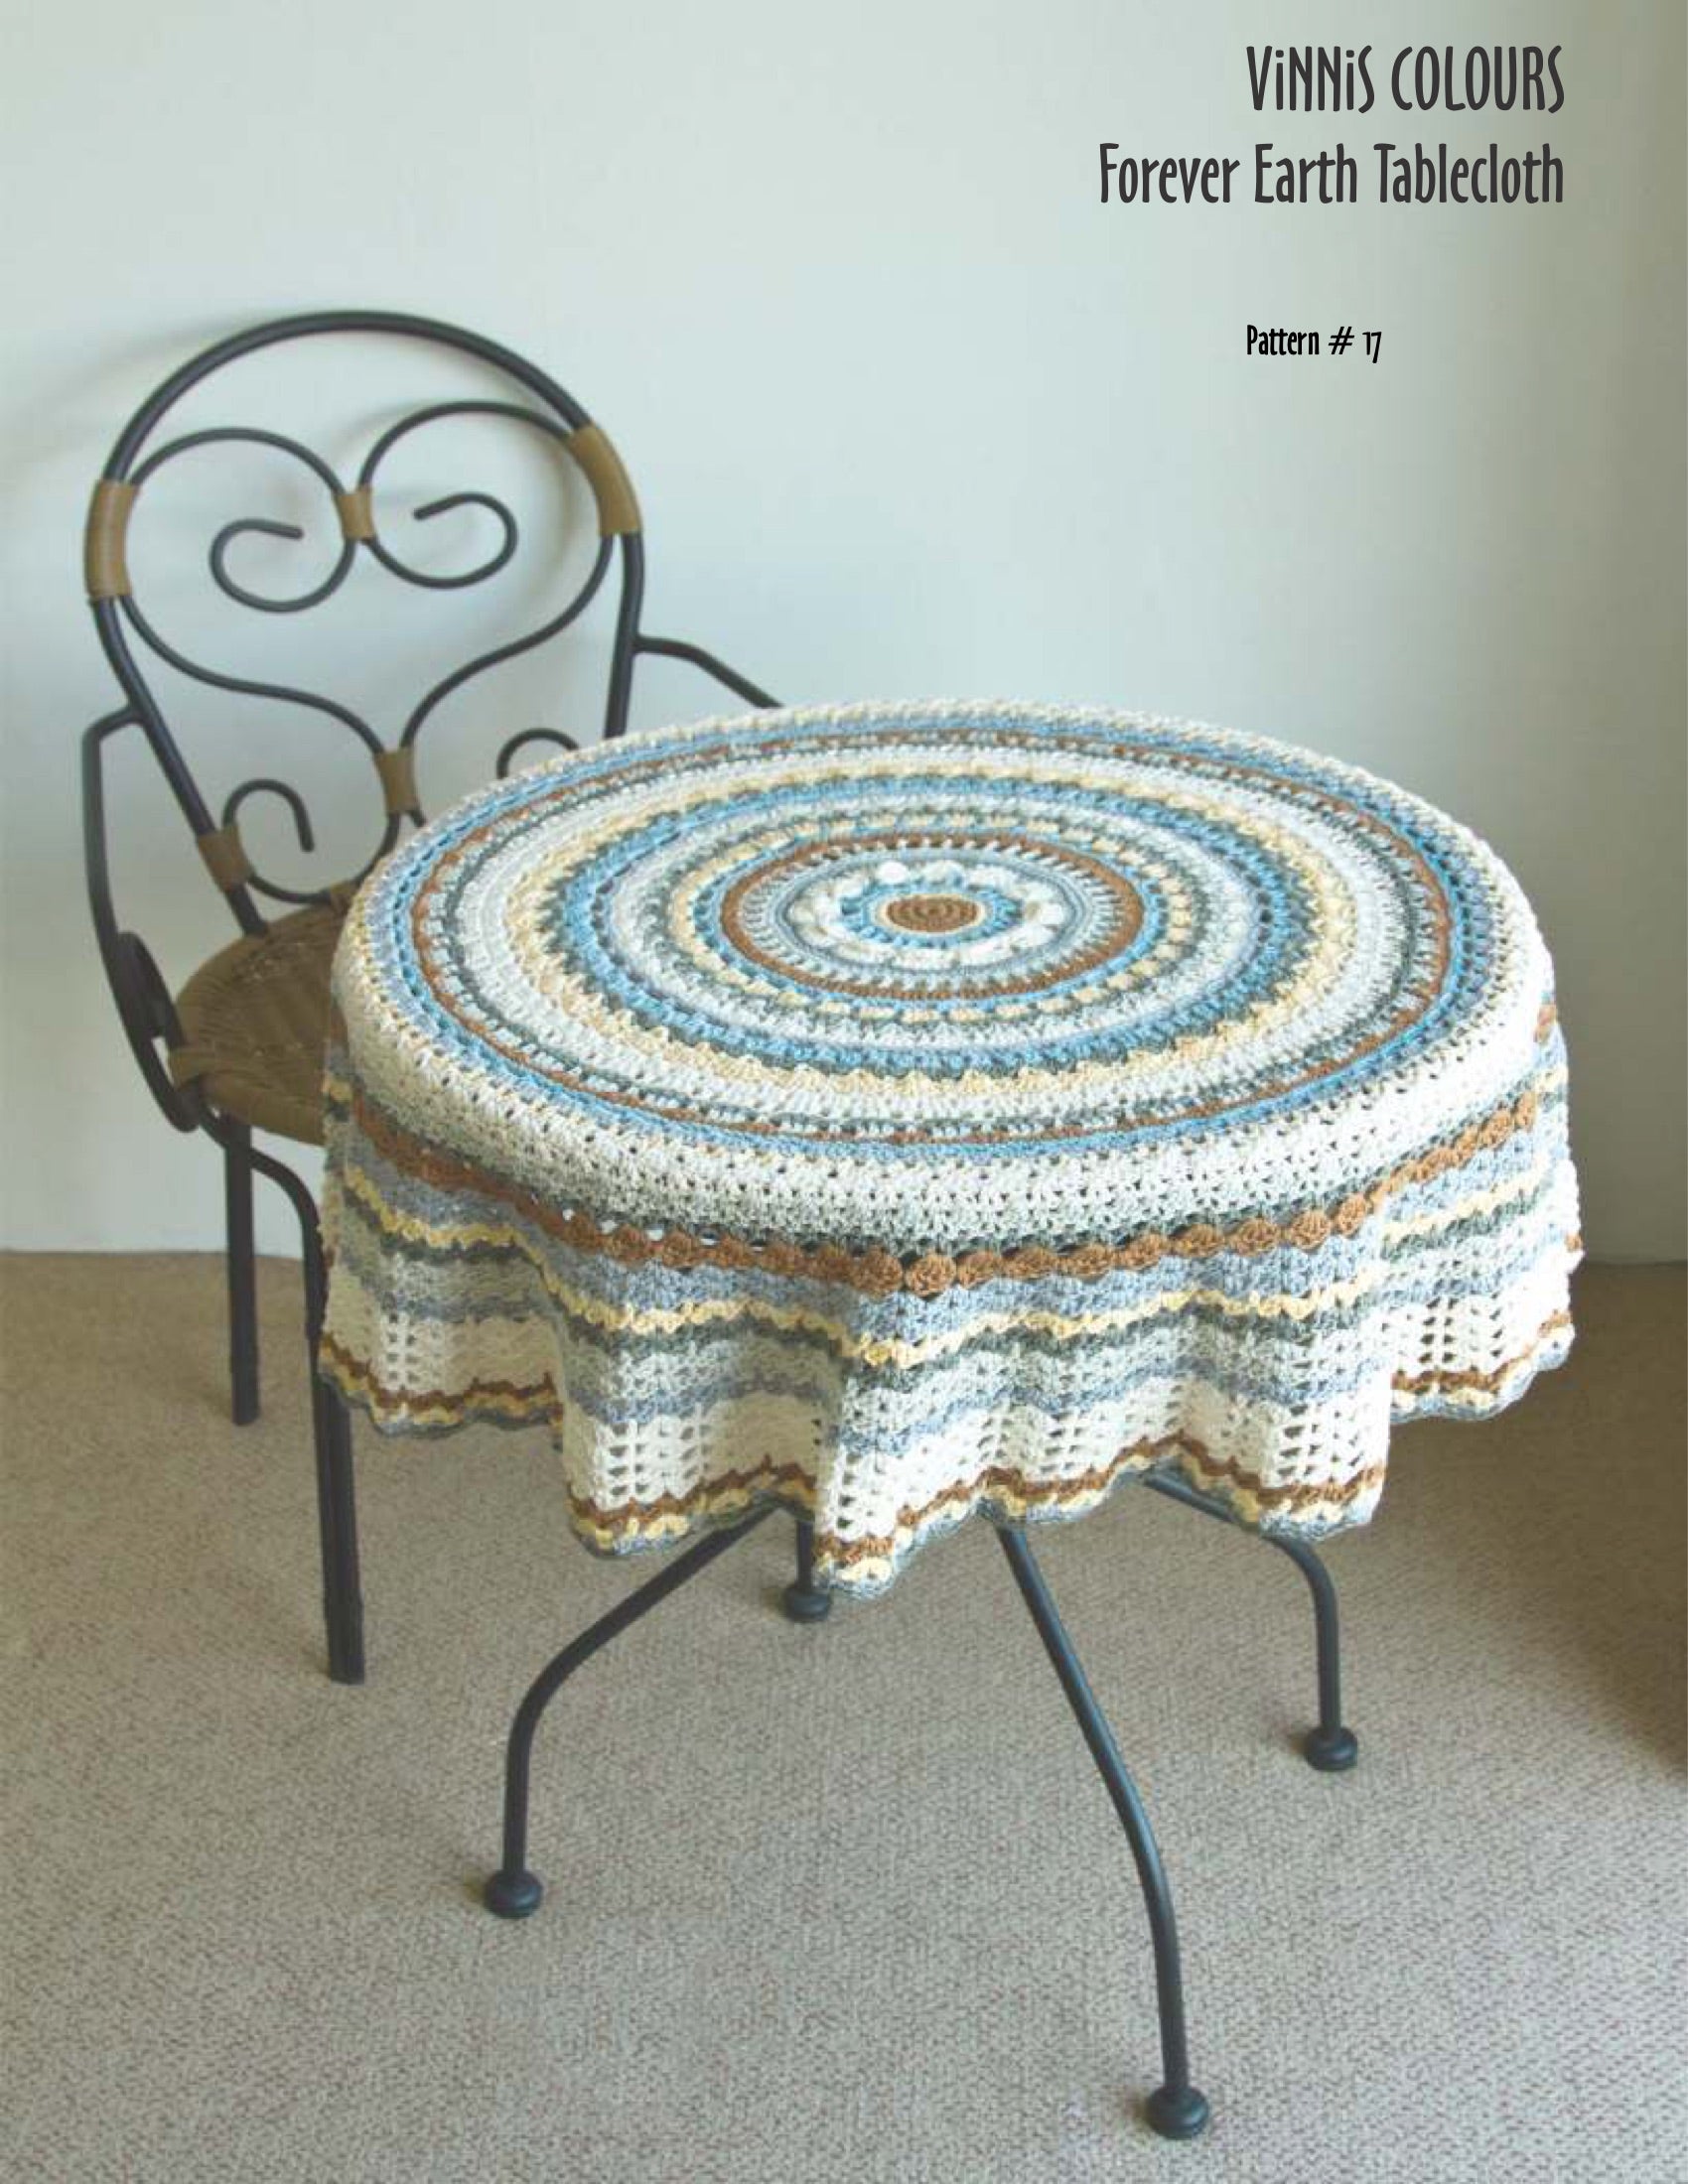 VCDL - P017 - Forever Earth Tablecloth